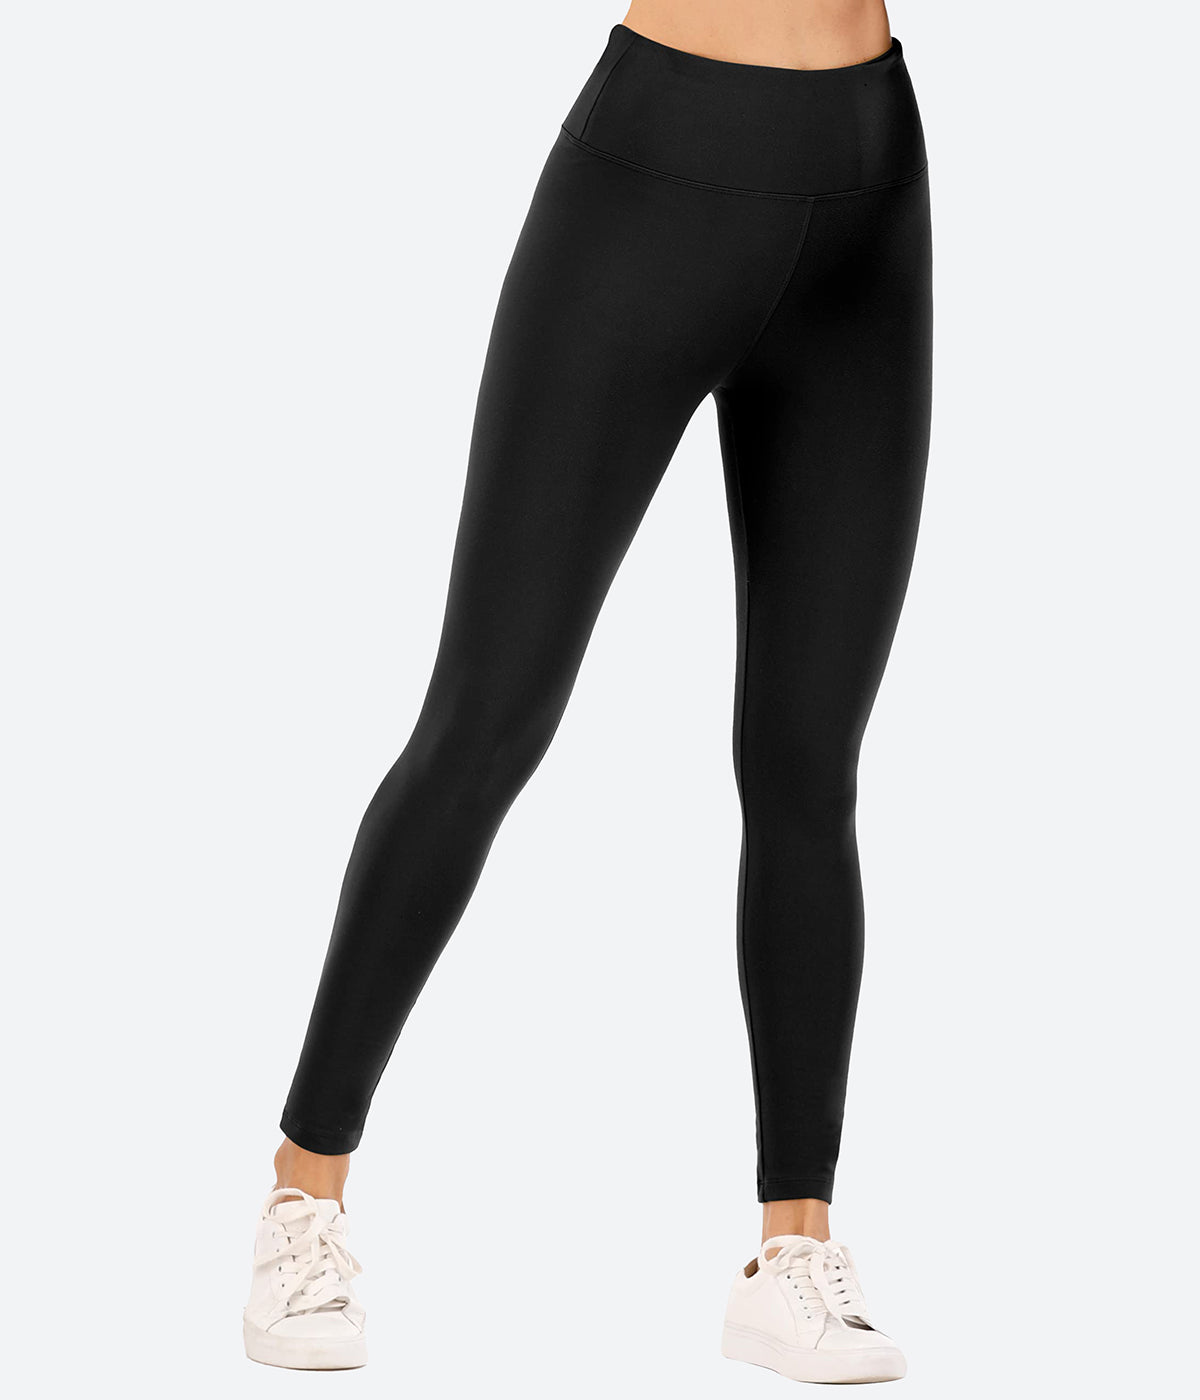  Ipletix Leggings for Women, High Waisted Leggings Buttery Soft Non  See Through Workout Yoga Pants Black : Clothing, Shoes & Jewelry